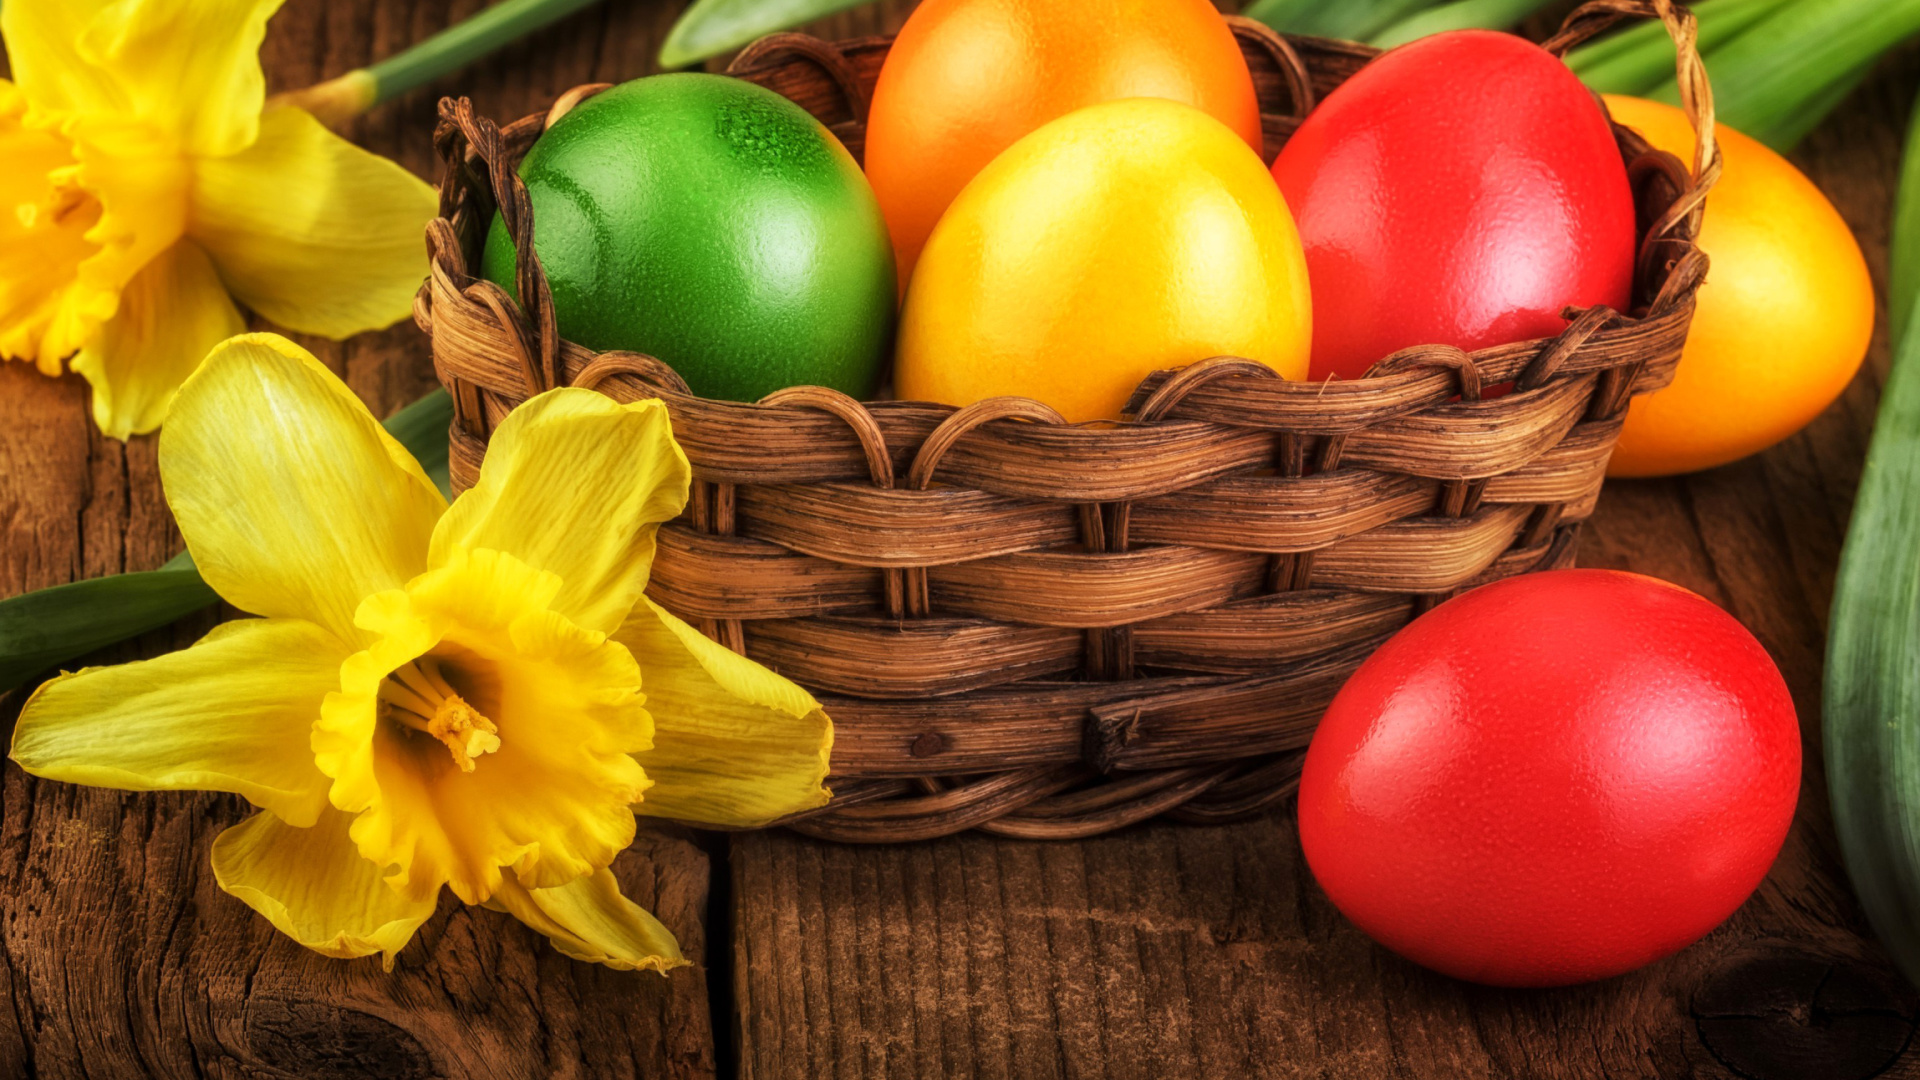 Daffodils and Easter Eggs wallpaper 1920x1080